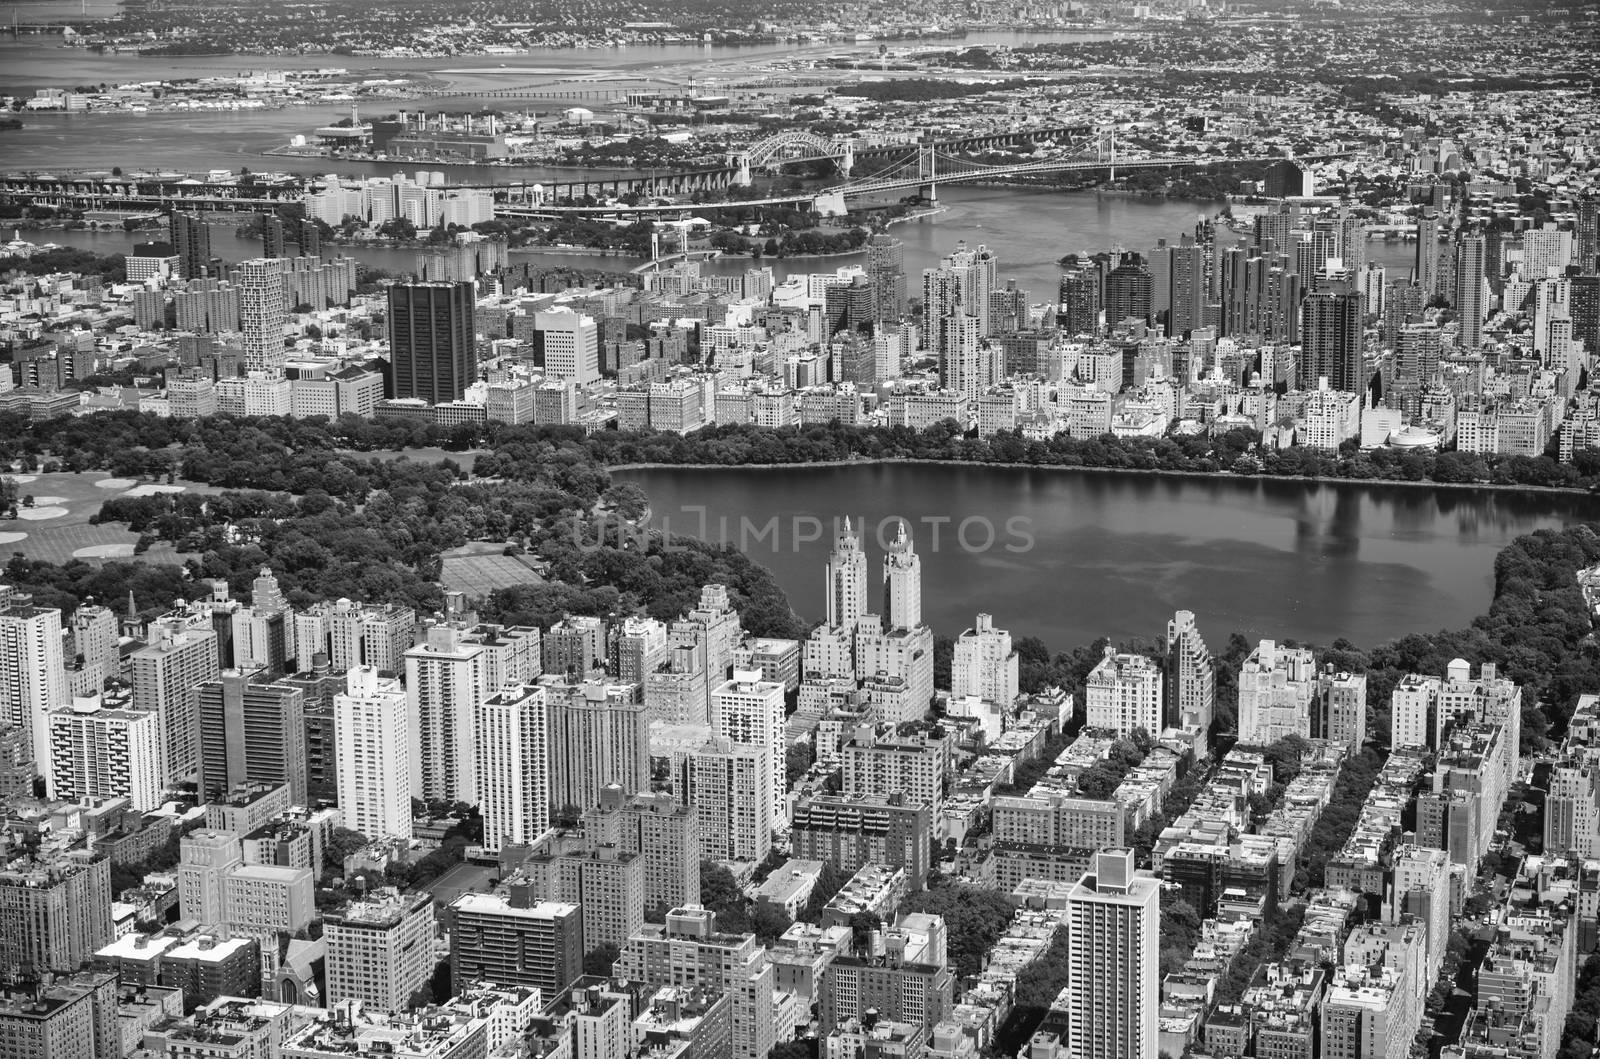 Awesome helicopter view of Jacqueline Kennedy Onassis Reservoir by jovannig